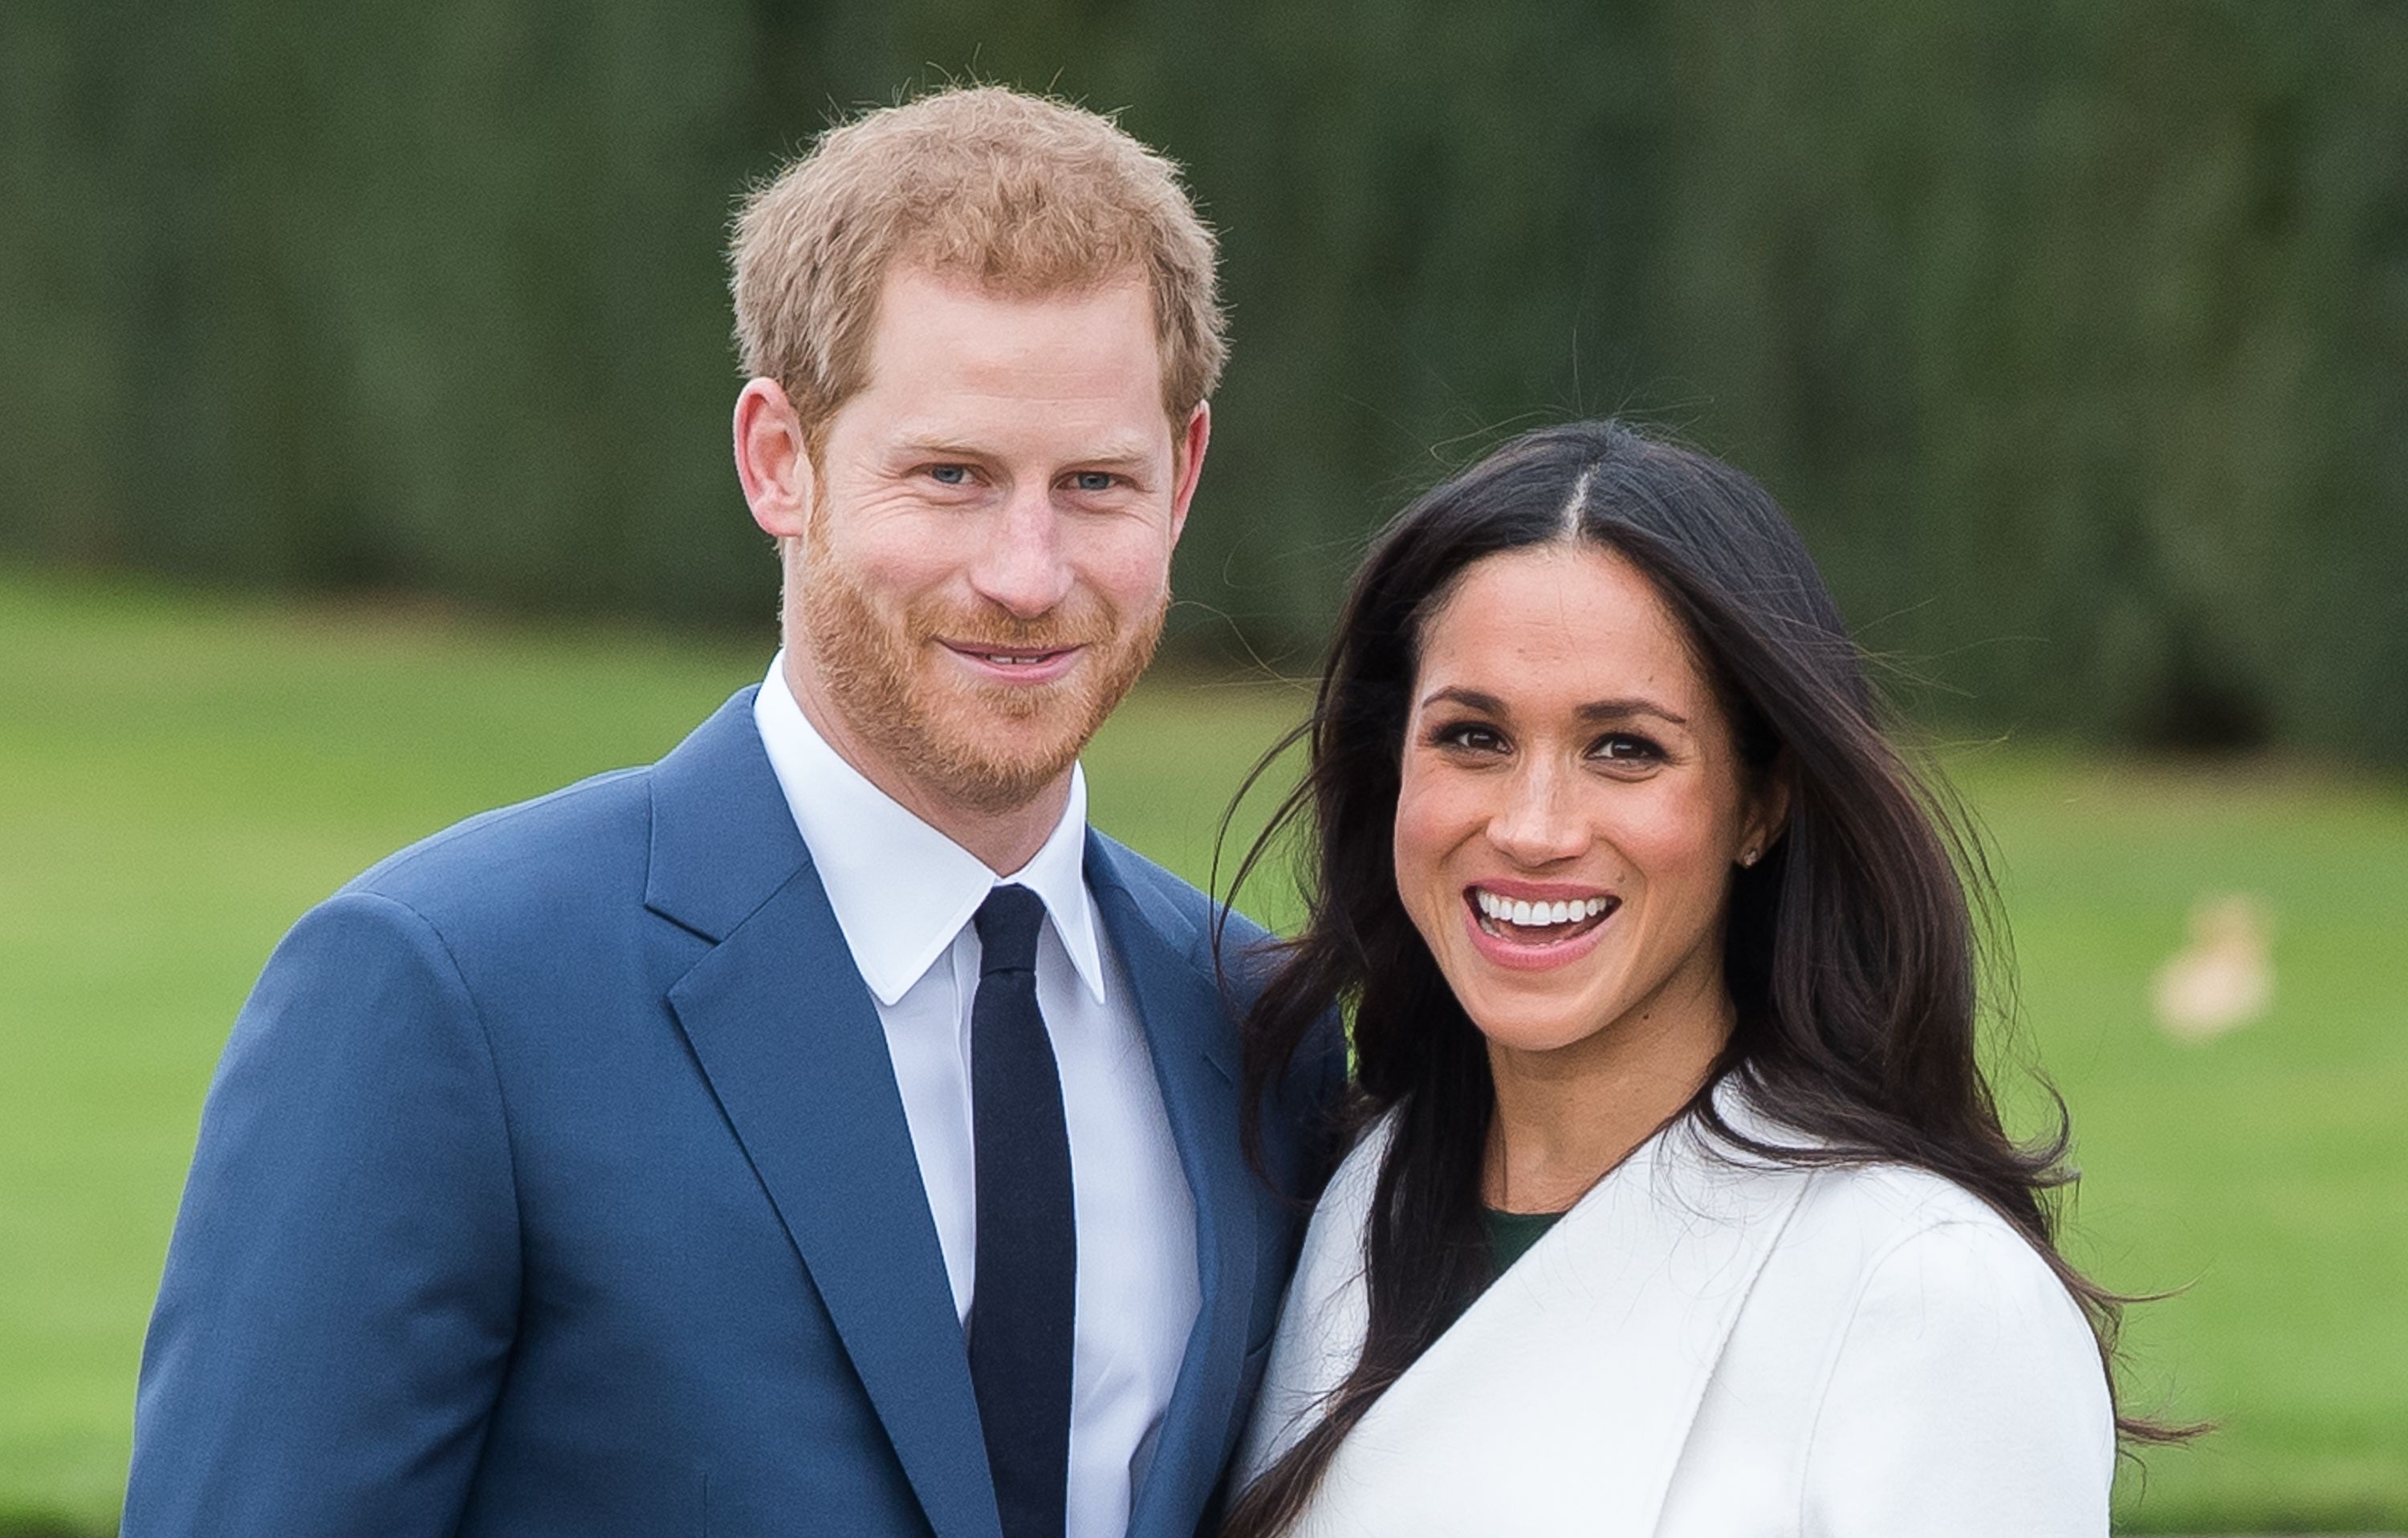 Prince Harry and Meghan Markle during an official photocall to announce their engagementat The Sunken Gardens at Kensington Palace in London, England | Photo: Samir Hussein/Samir Hussein/WireImage via Getty Images